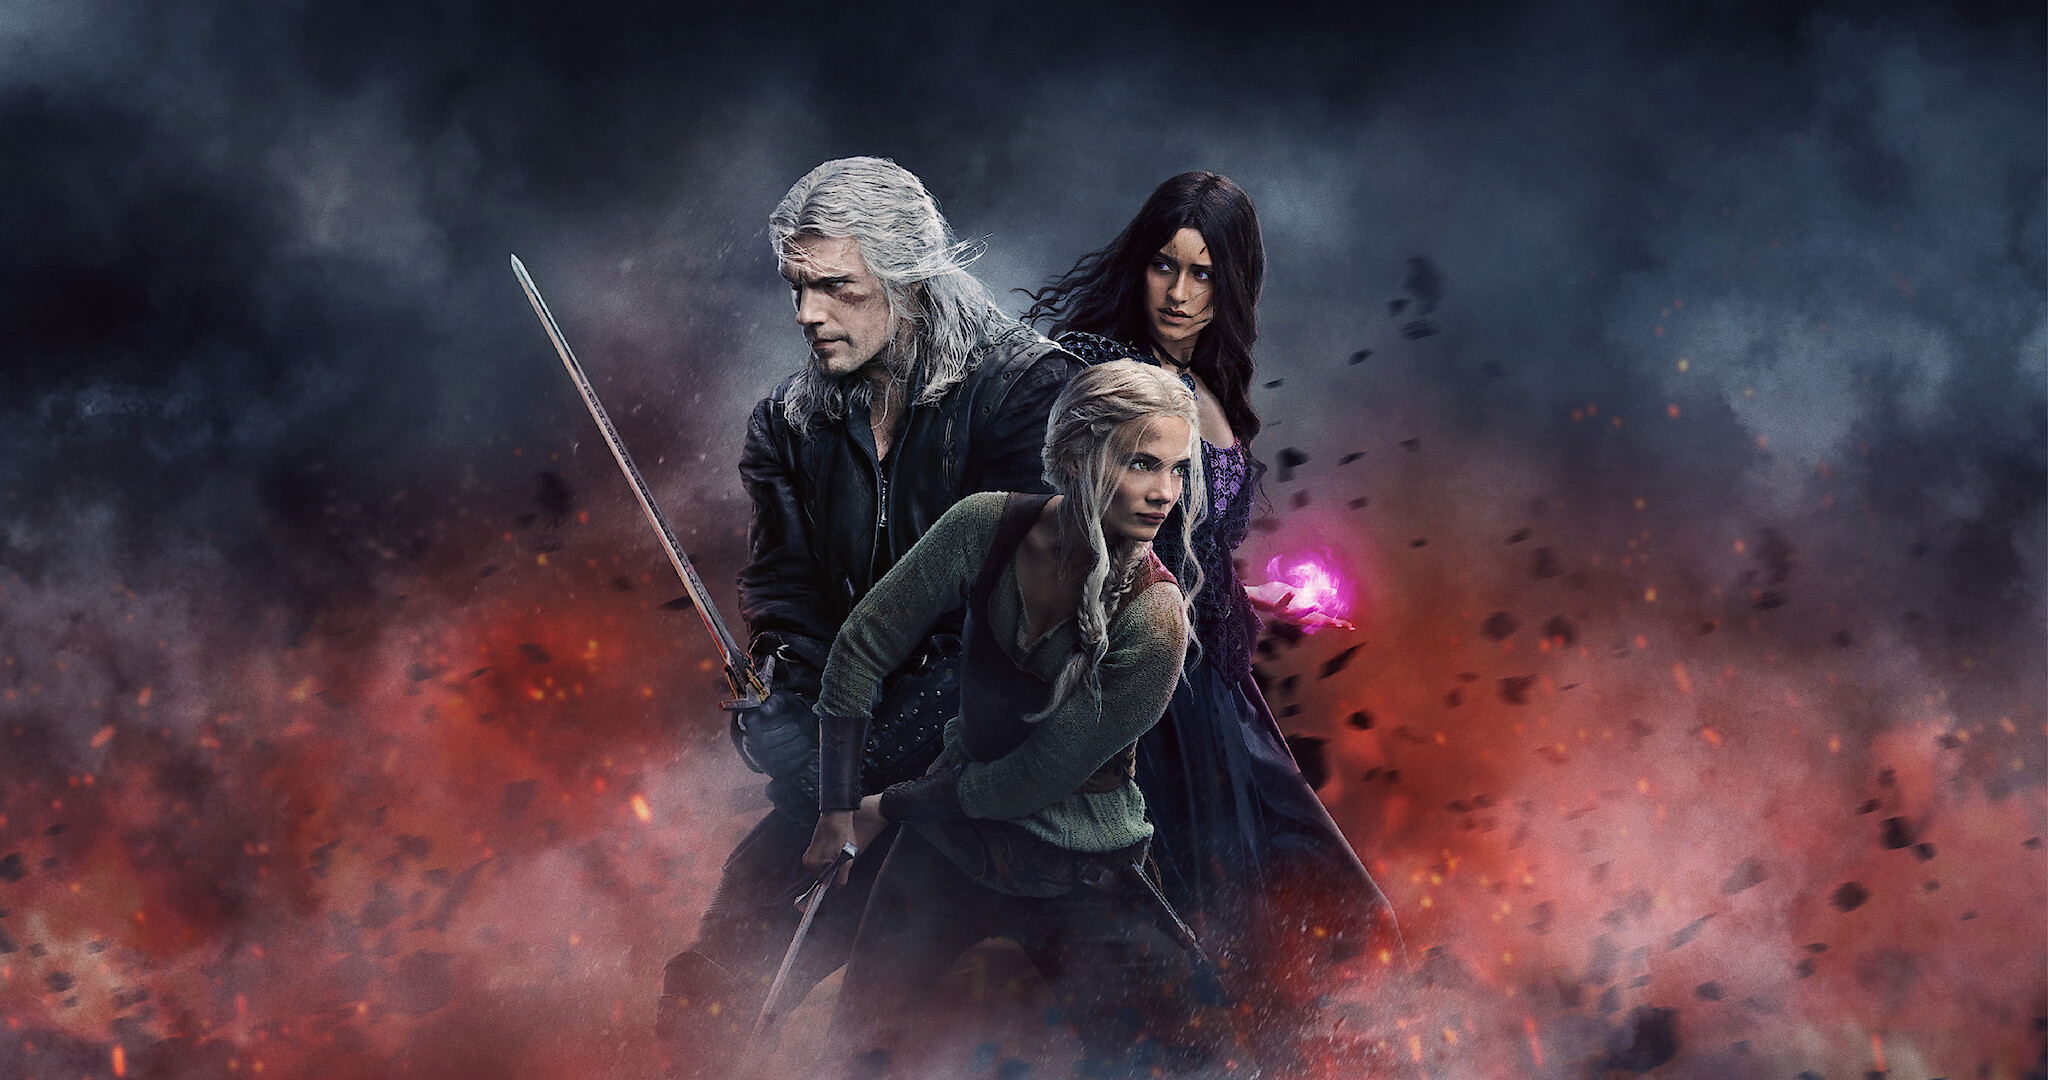 Henry Cavill's The Witcher exit draws nearer with new Season 3 Vol. 2  trailer